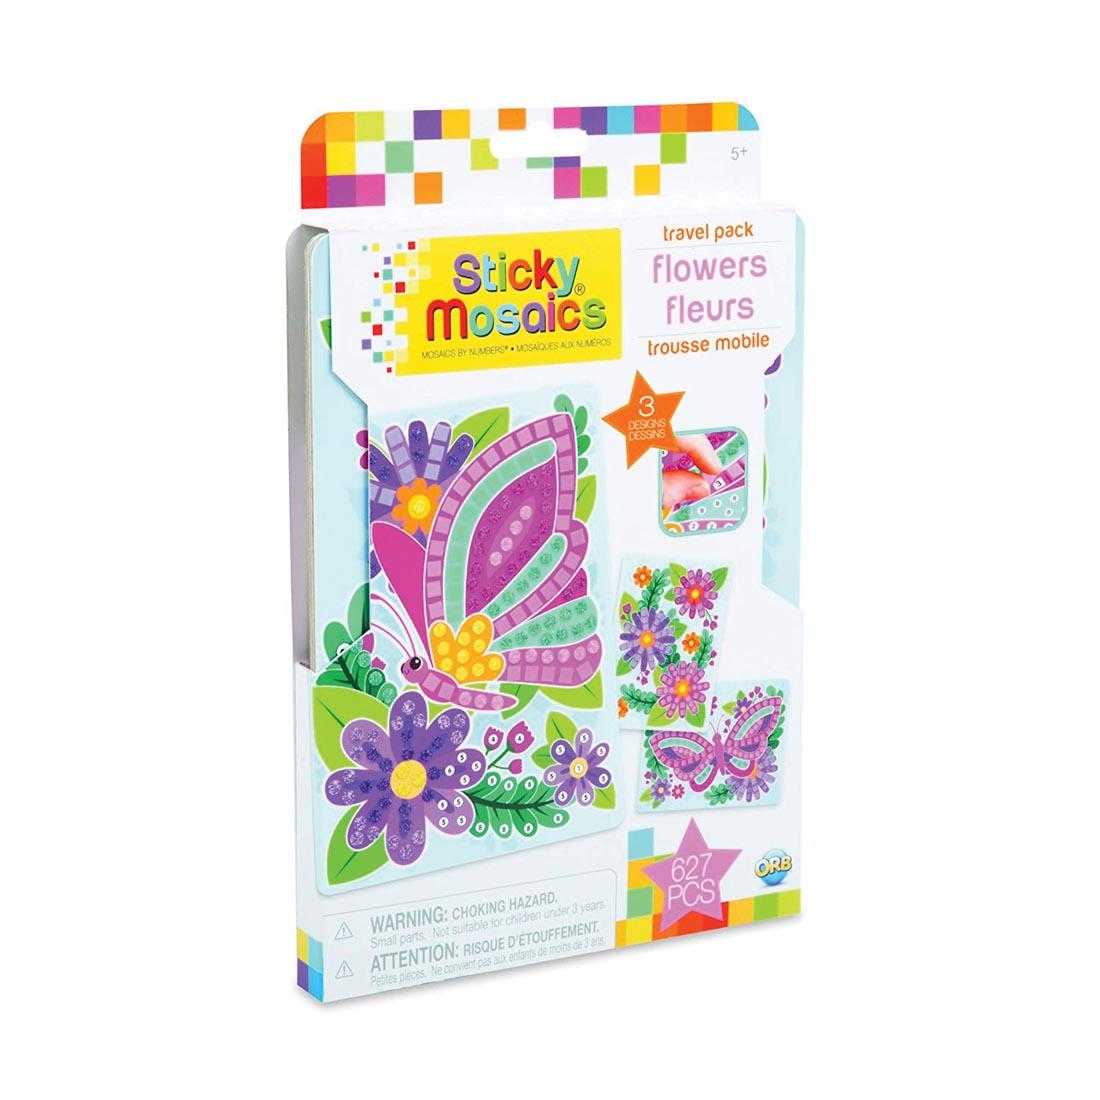 box of adhesive-backed foam mosaic crafts, featuring 3 different flower designs